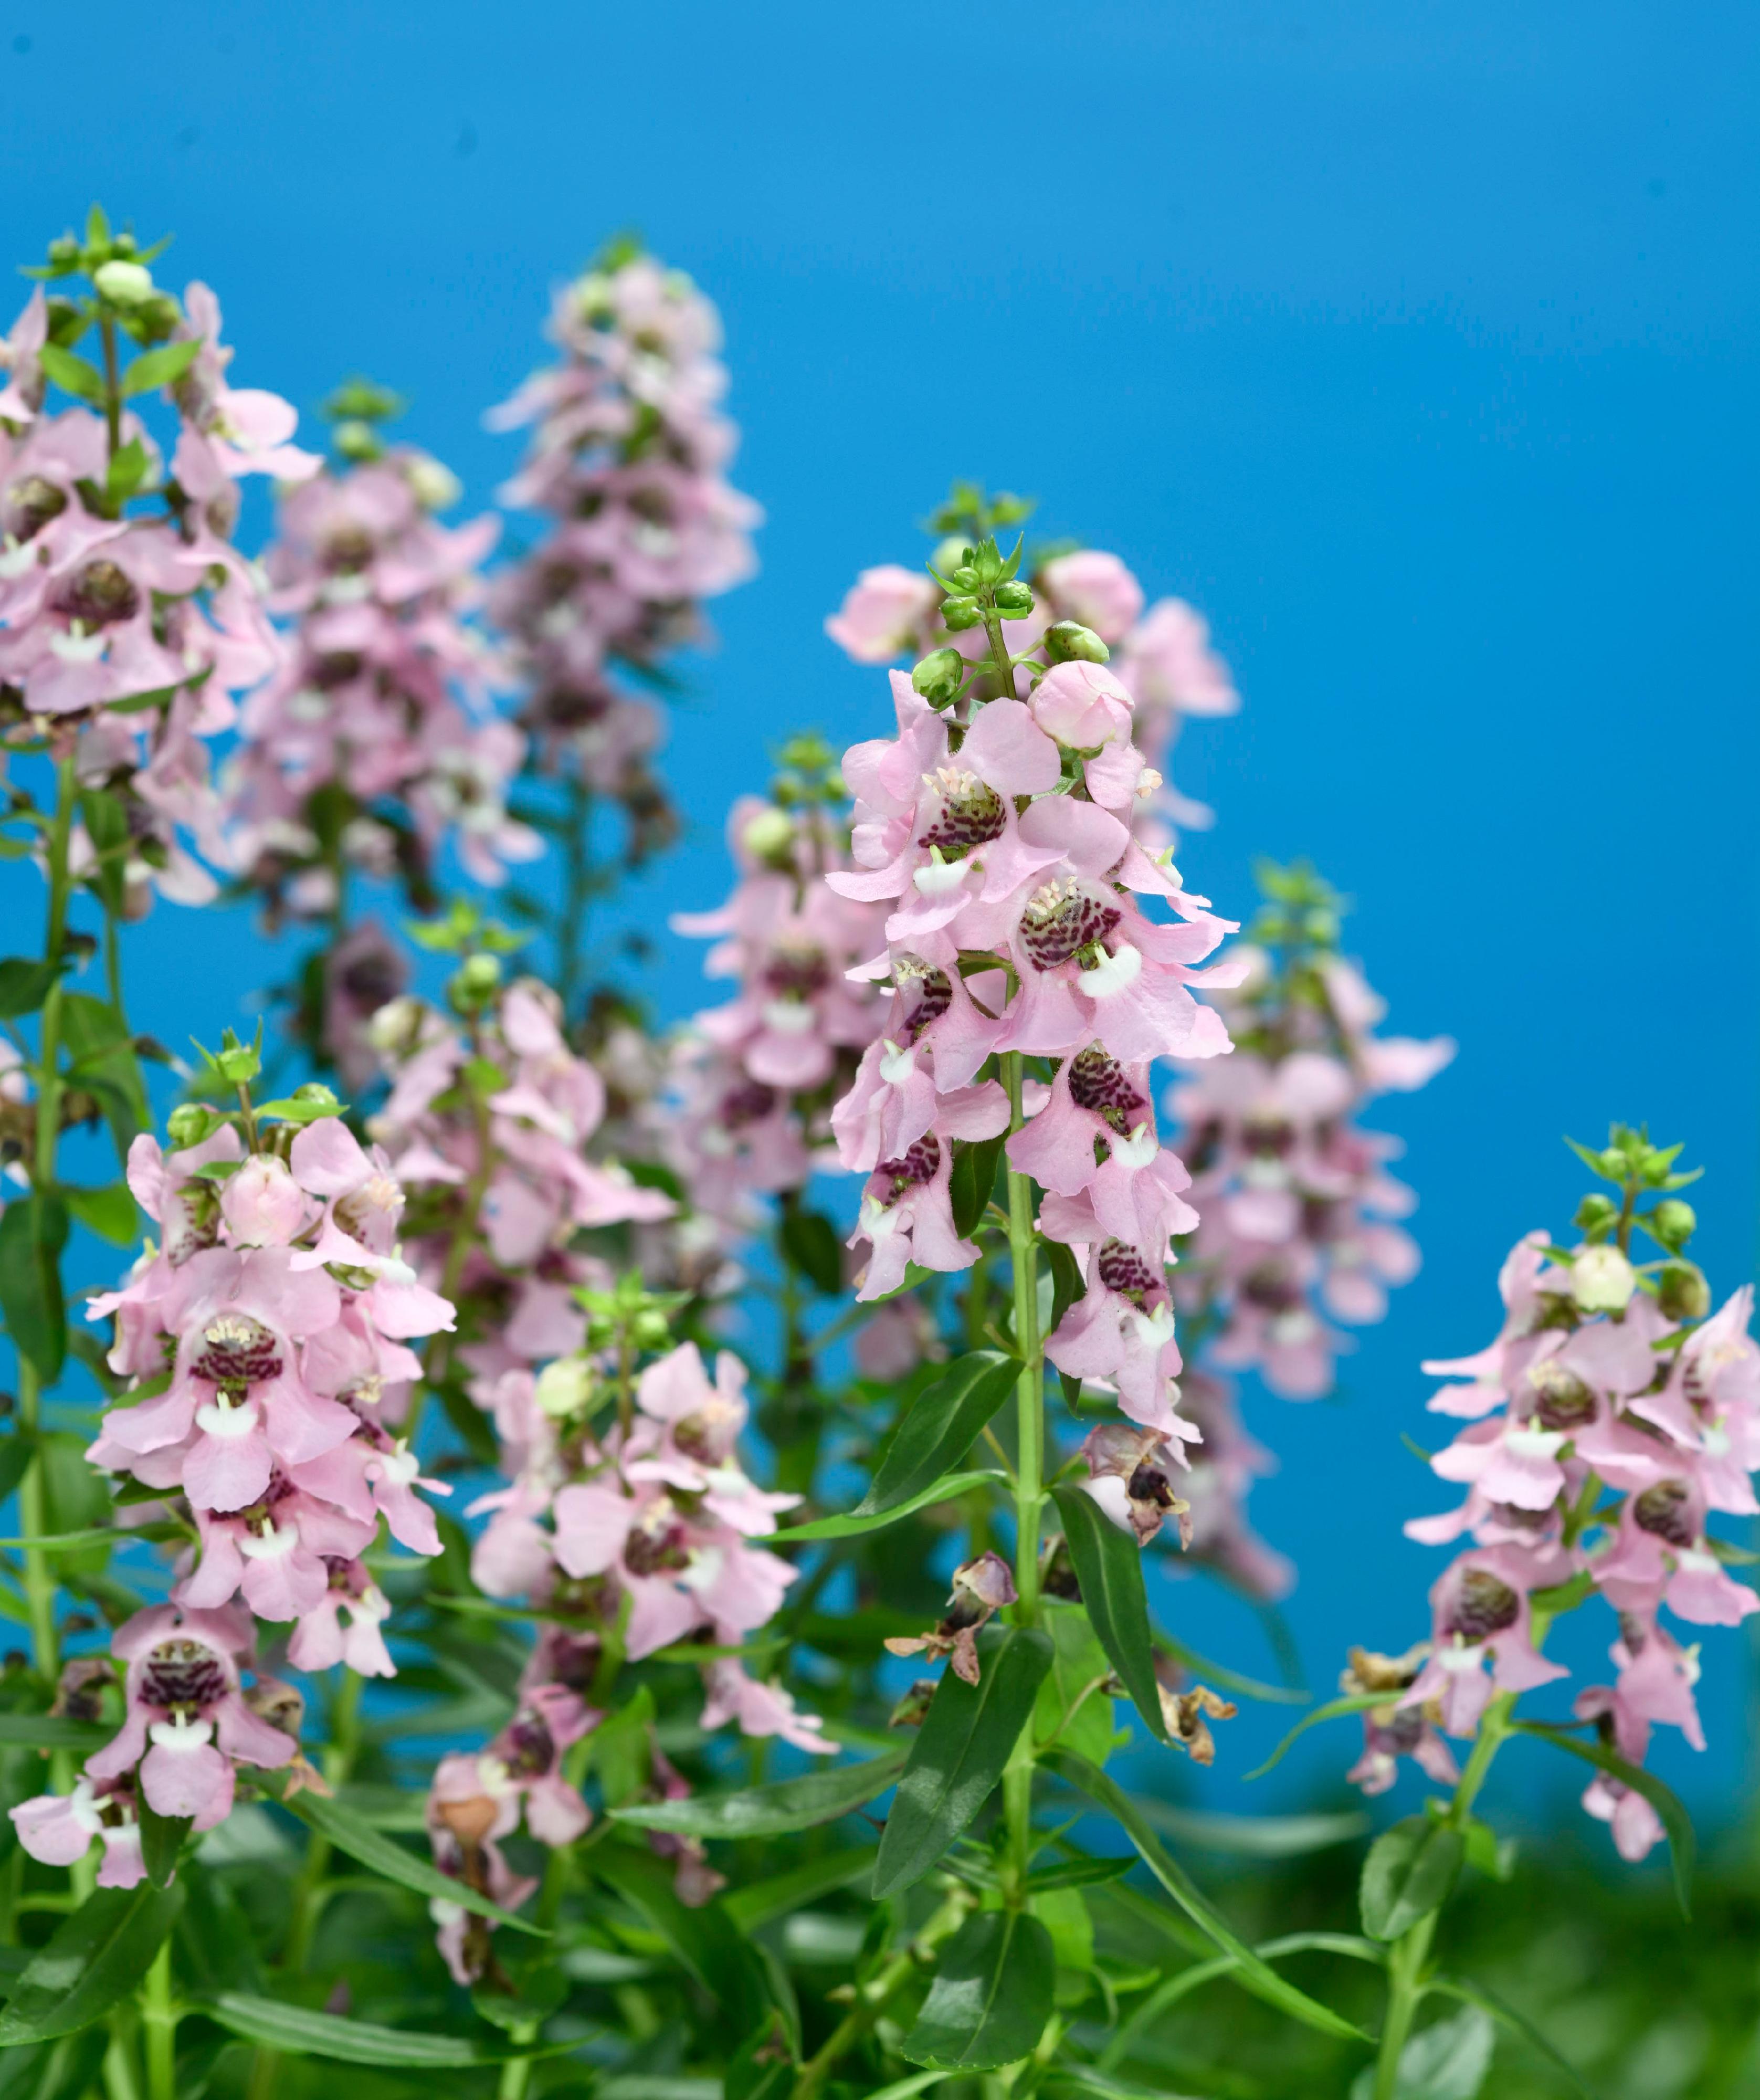 The Hong Kong Flower Show will be held at Victoria Park for 10 days from March 15 to 24, featuring the colourful angelonia as the theme flower and "Floral Joy Around Town" as the main theme. Angelonia, also known as "angel flower", has a small and unique shape with a refreshing fragrance.

